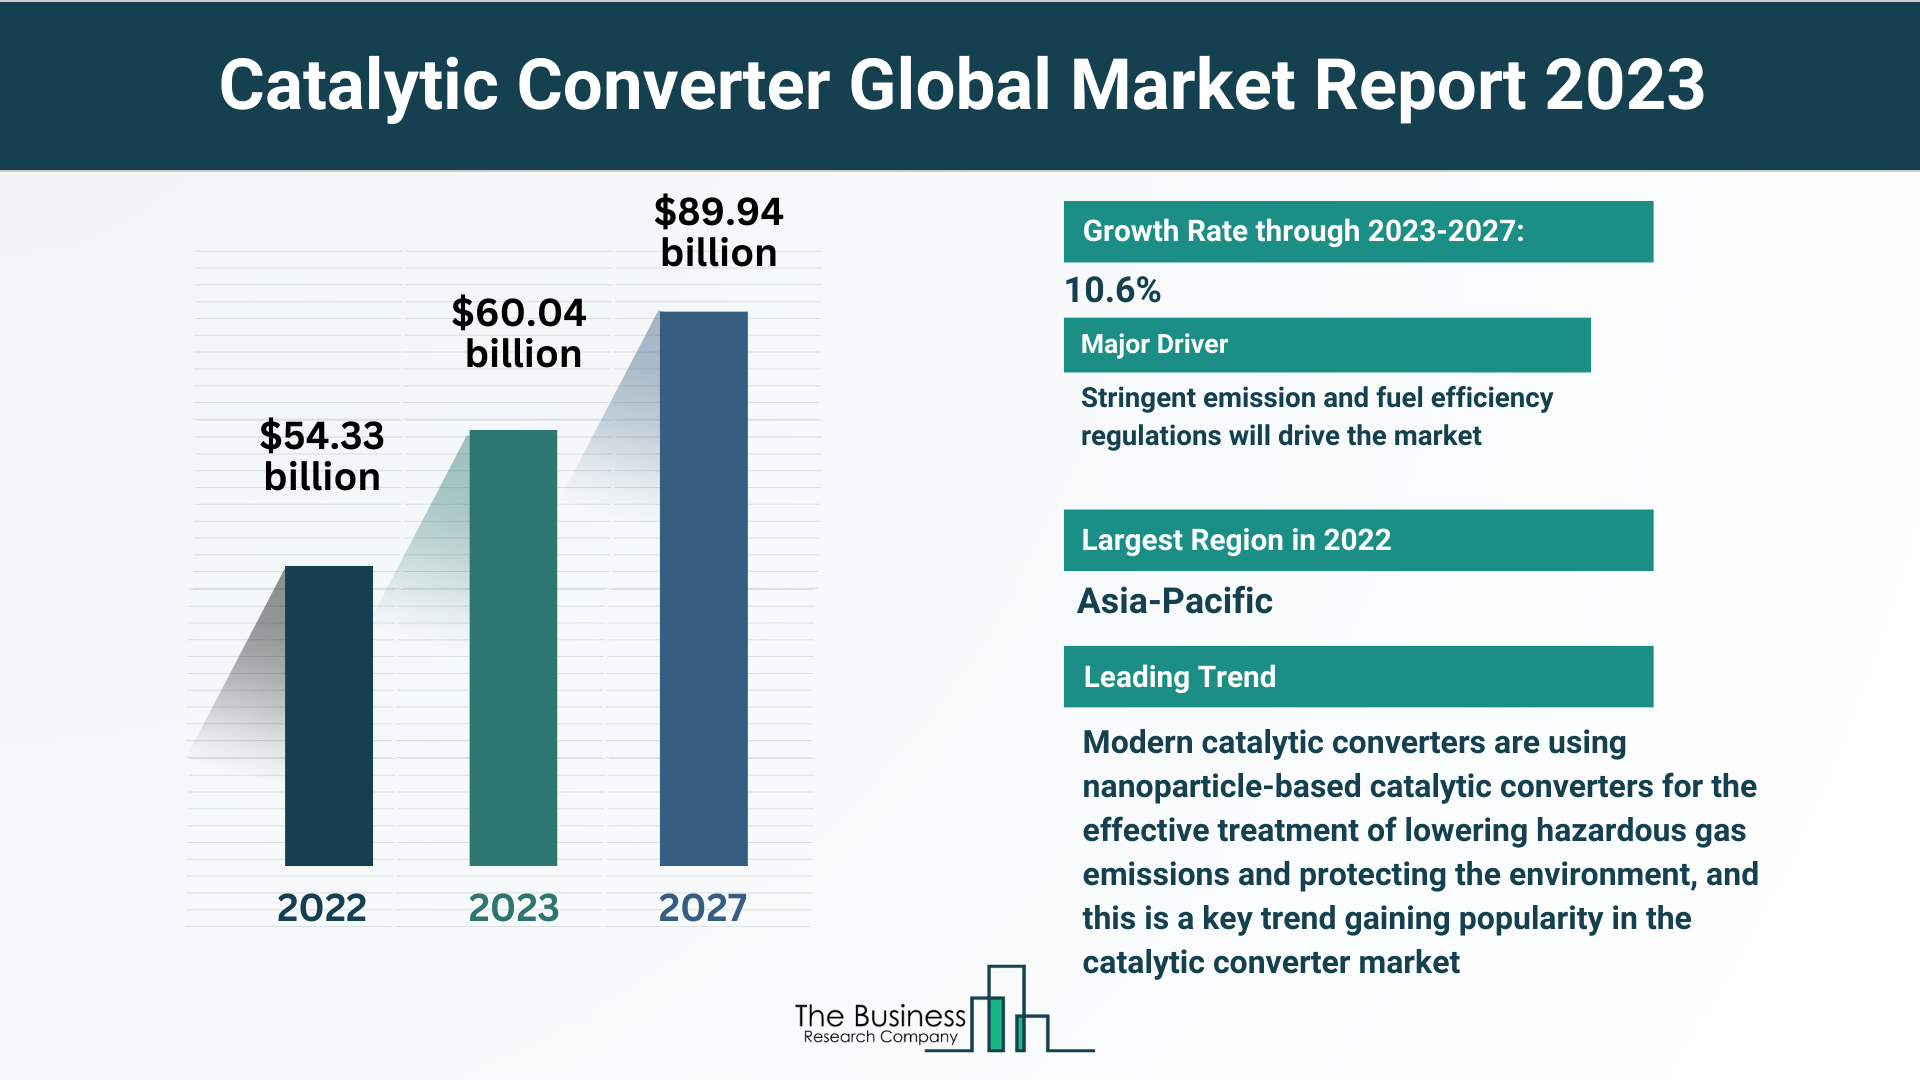 Global Catalytic Converter Market Analysis: Size, Drivers, Trends, Opportunities And Strategies